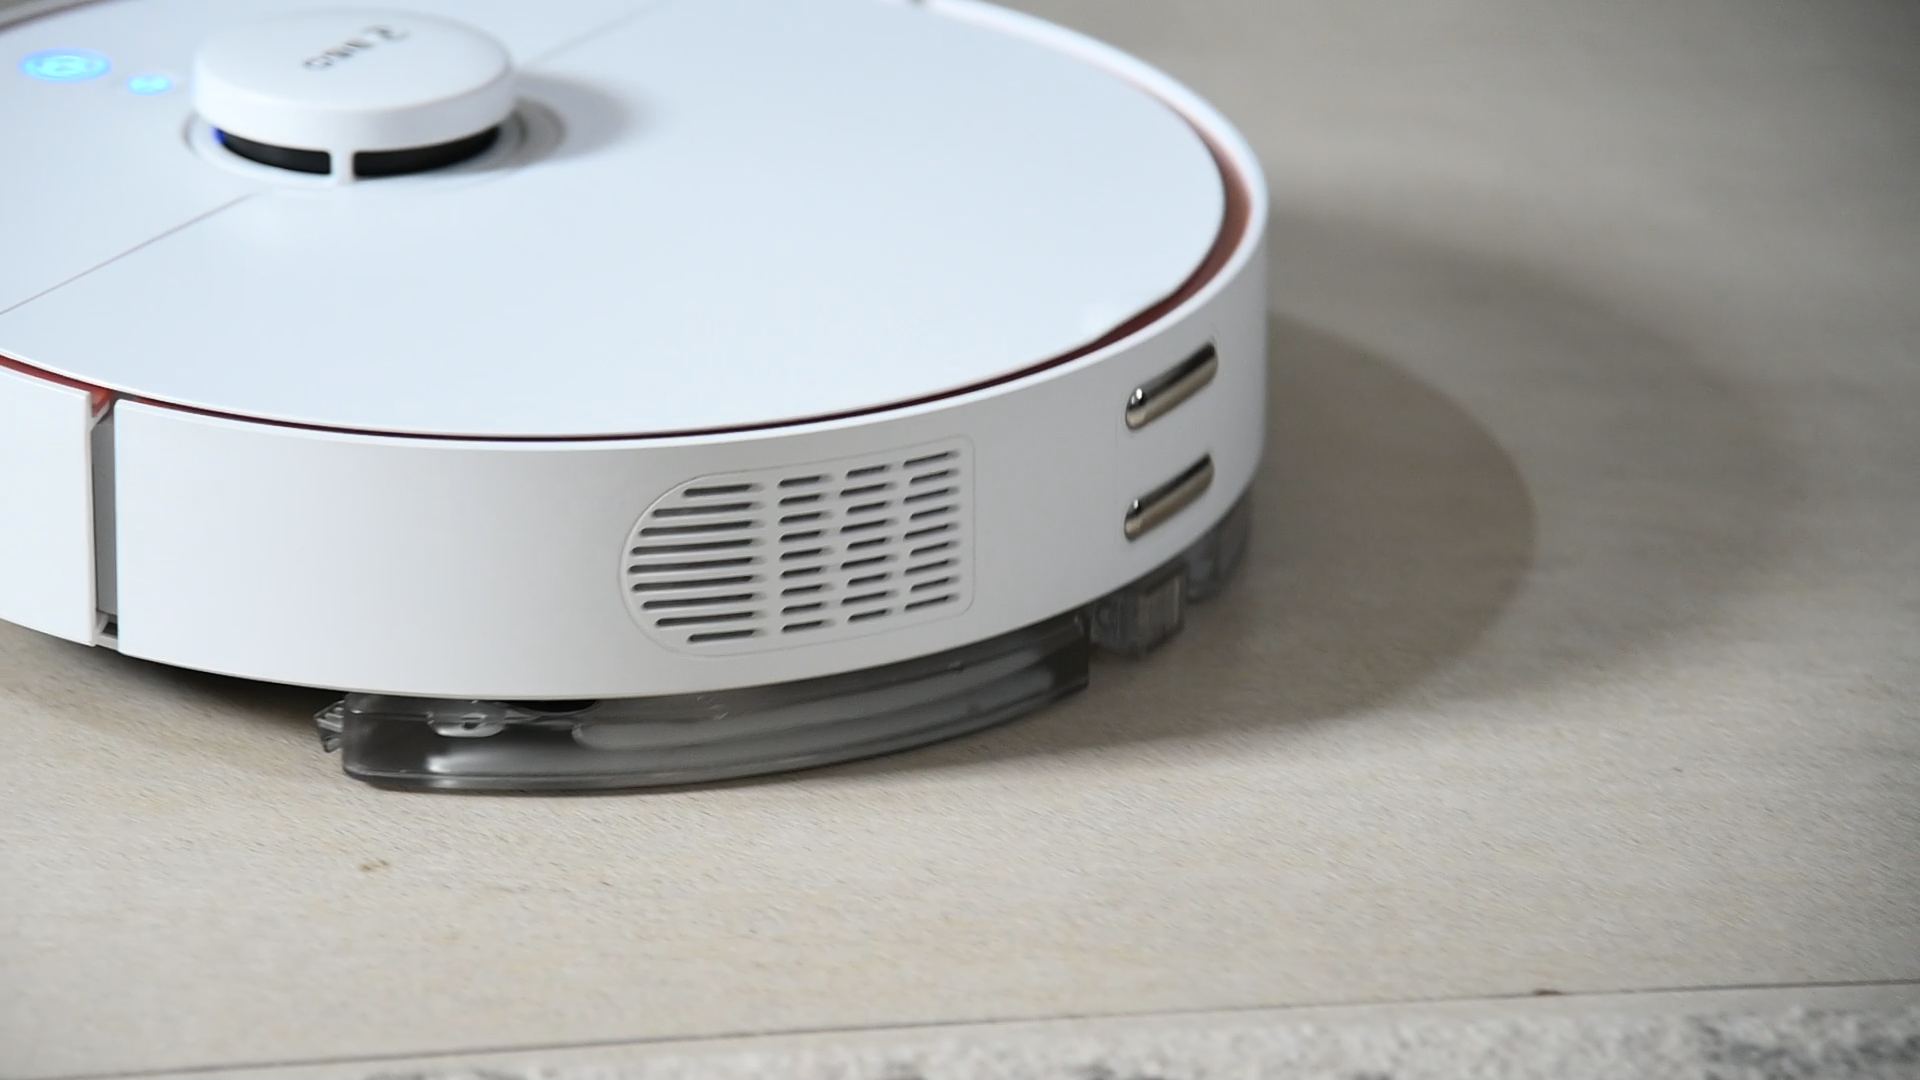 360 S7 Robot Vacuum Cleaner mopping mode